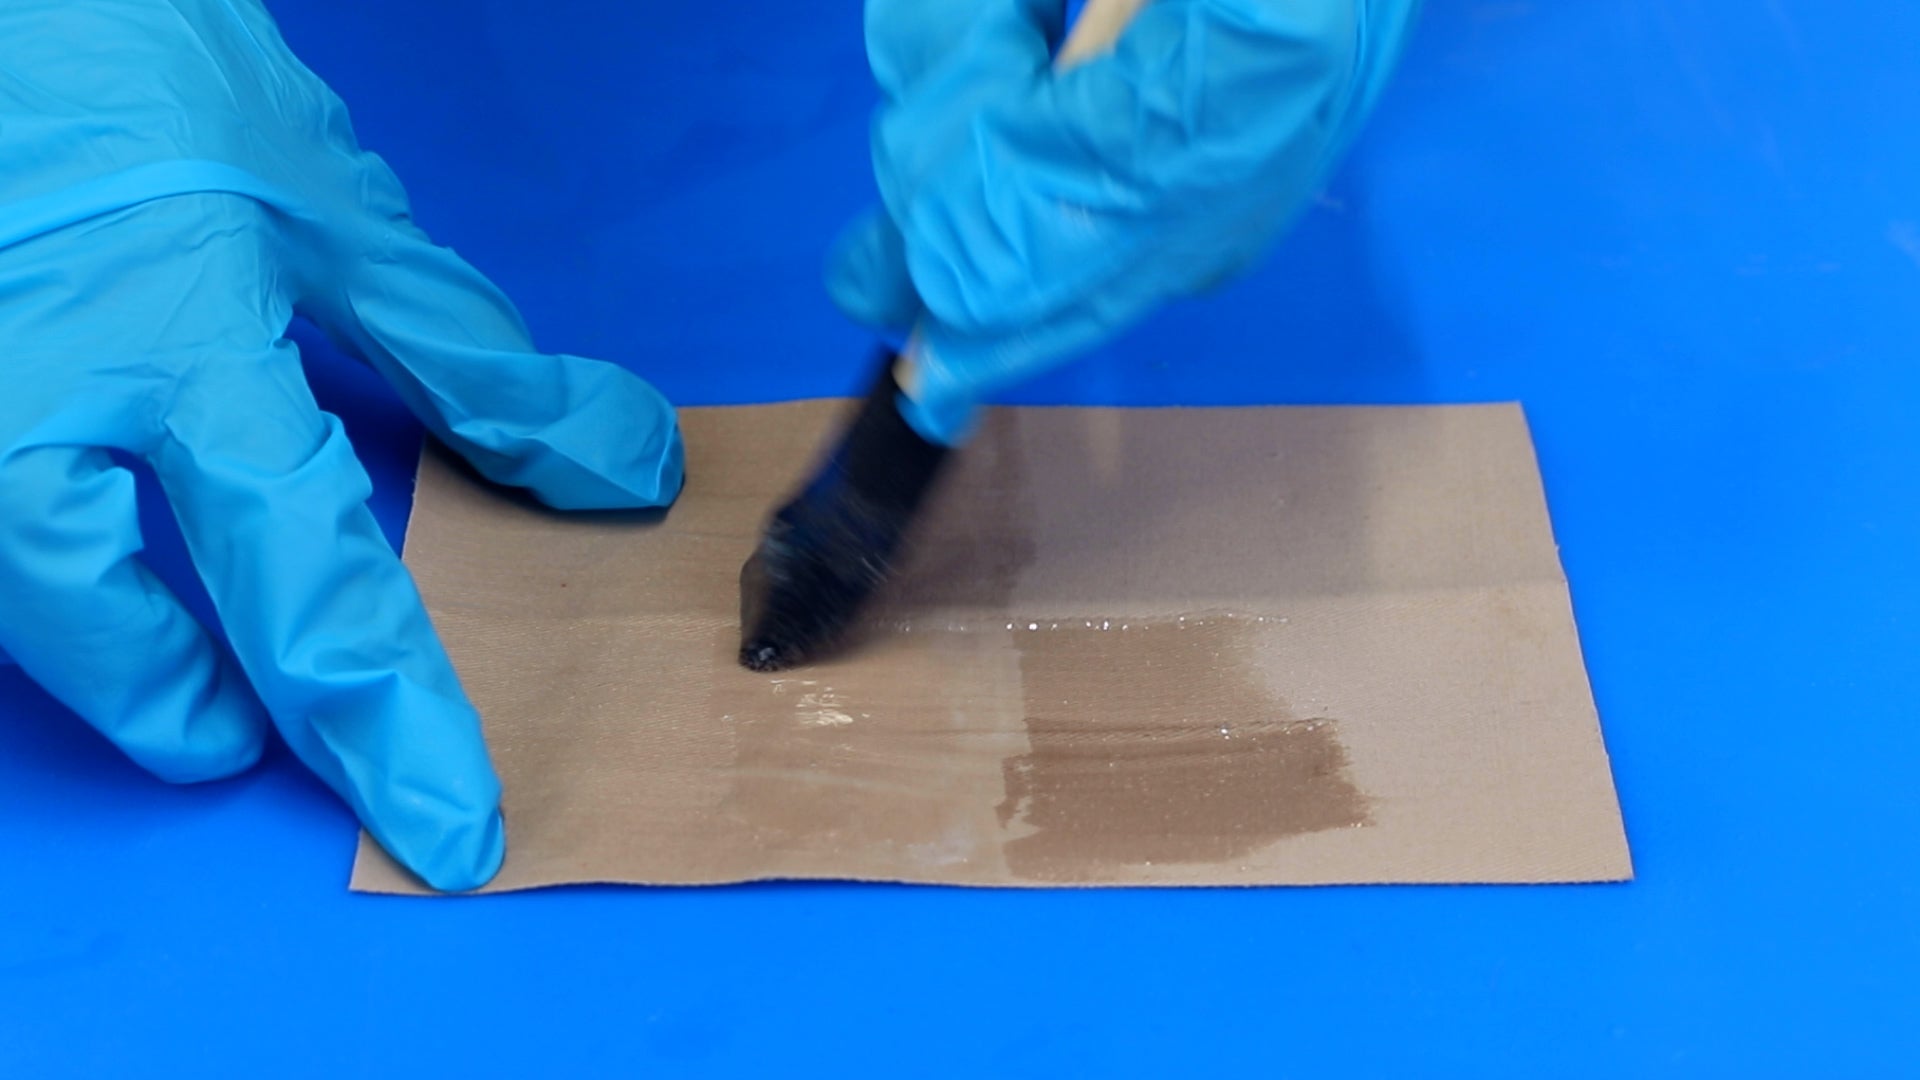 resin can soak into fabric so seal first